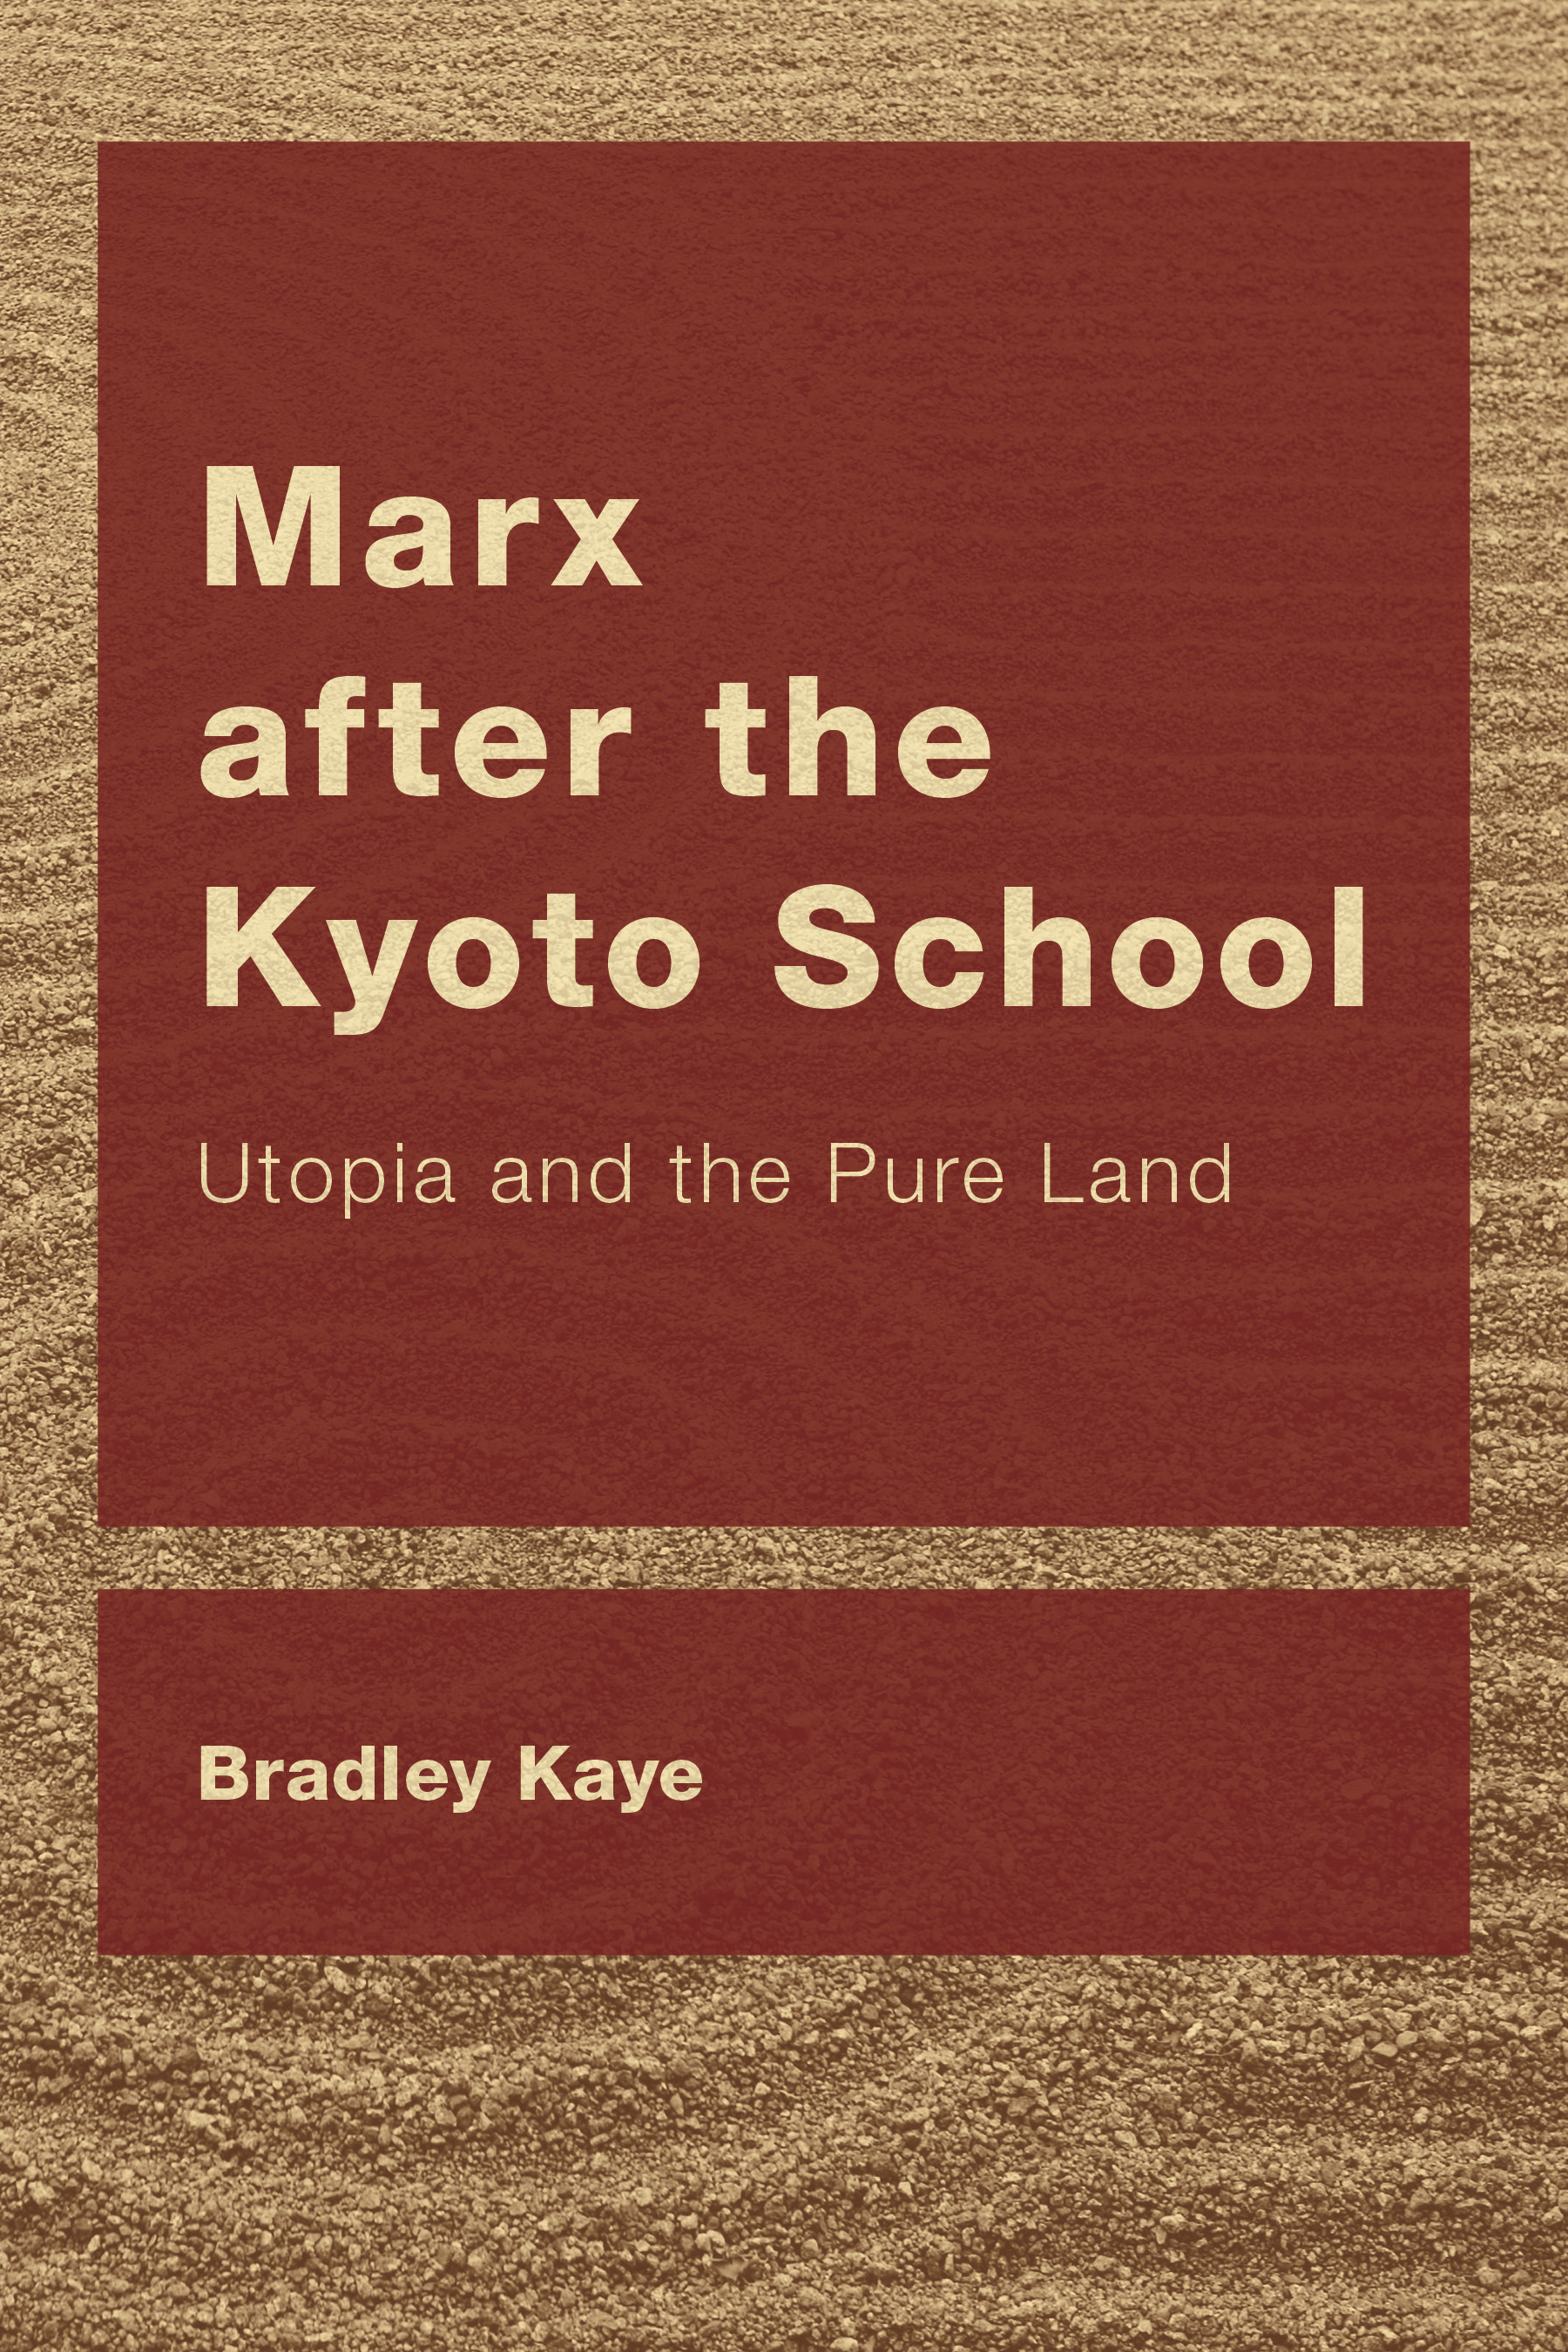 Marx after the Kyoto School: Utopia and the Pure Land